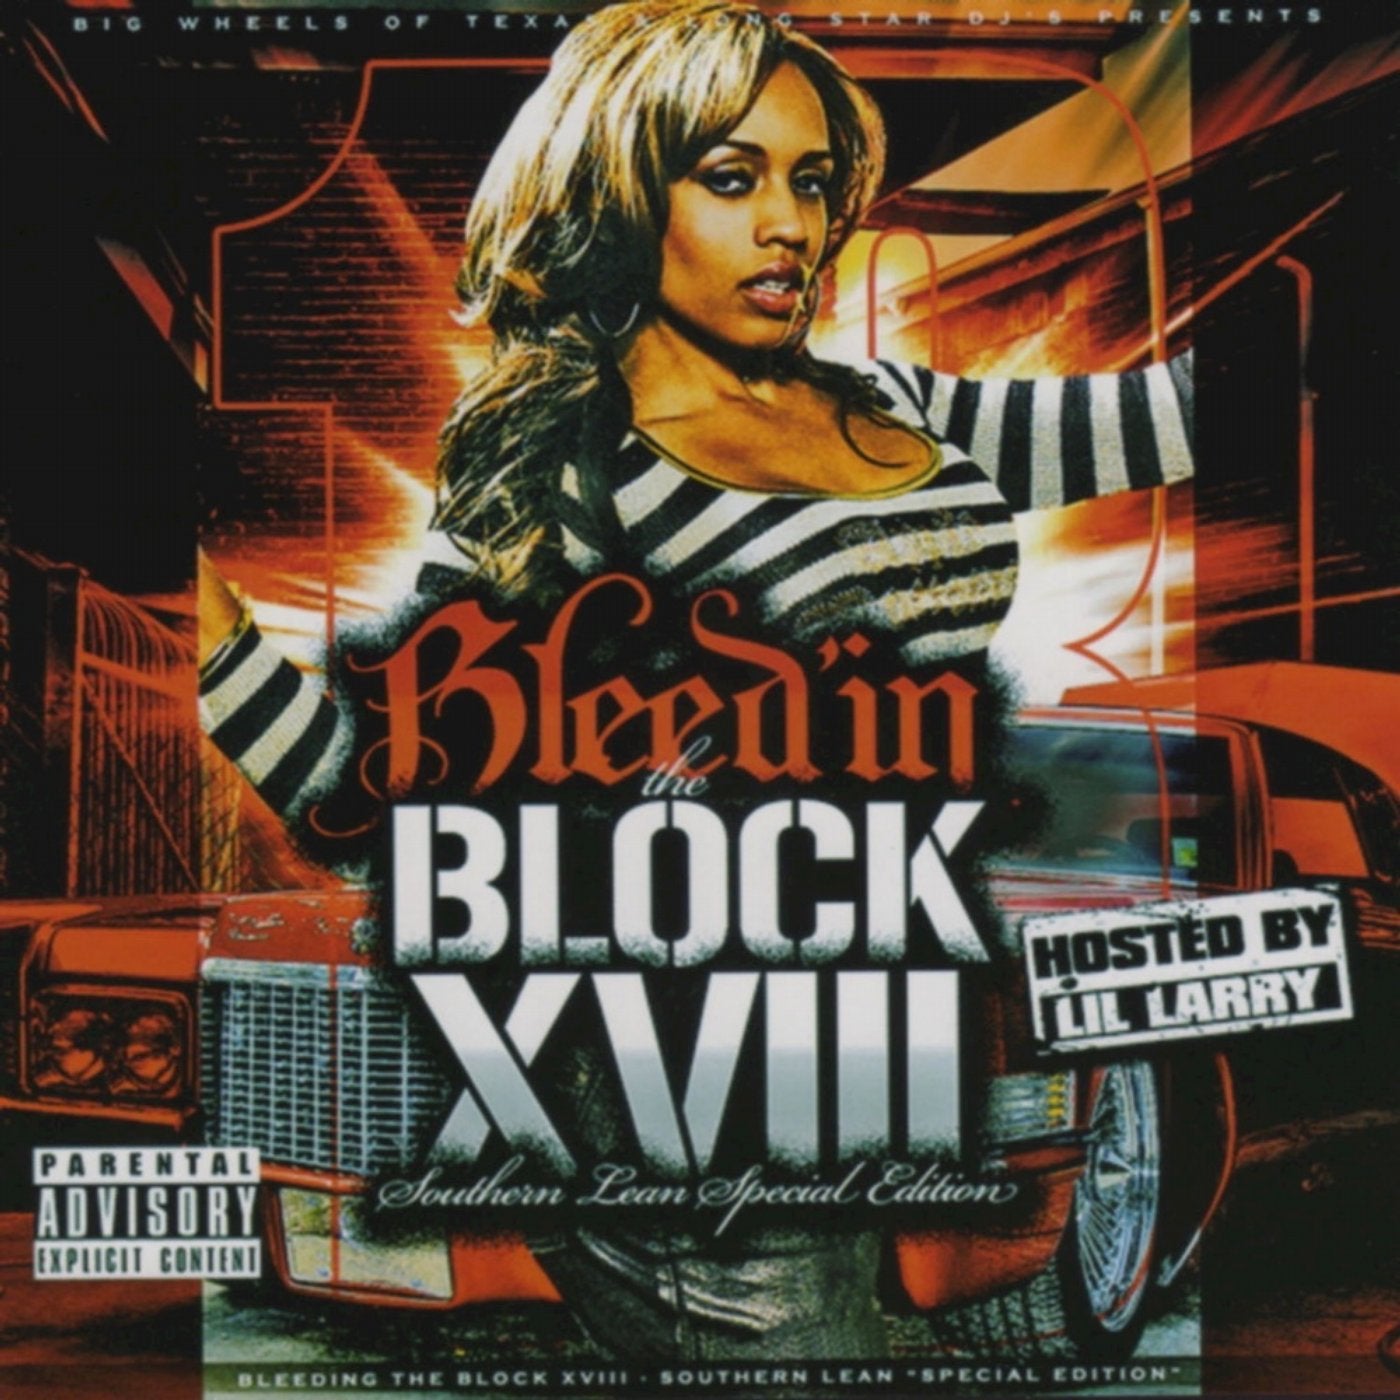 Bleed'in the Block XVIII - Southern Lean Special Edition